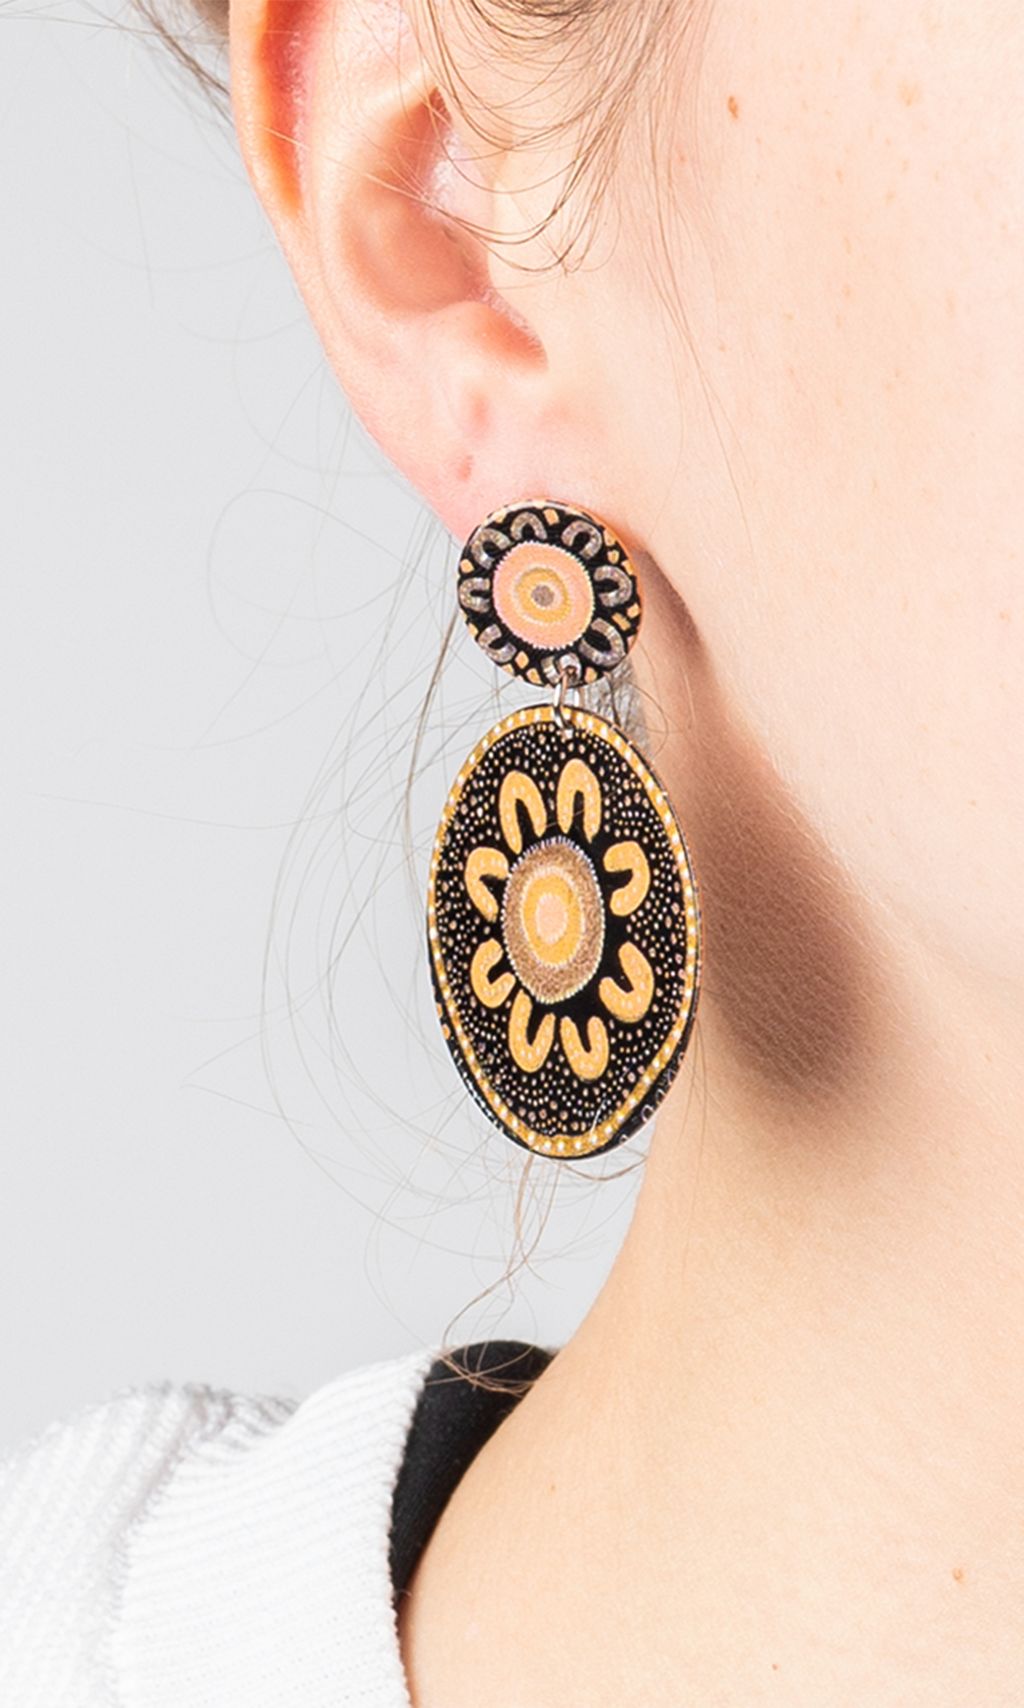 Aboriginal Art Earrings The Path They Have Laid